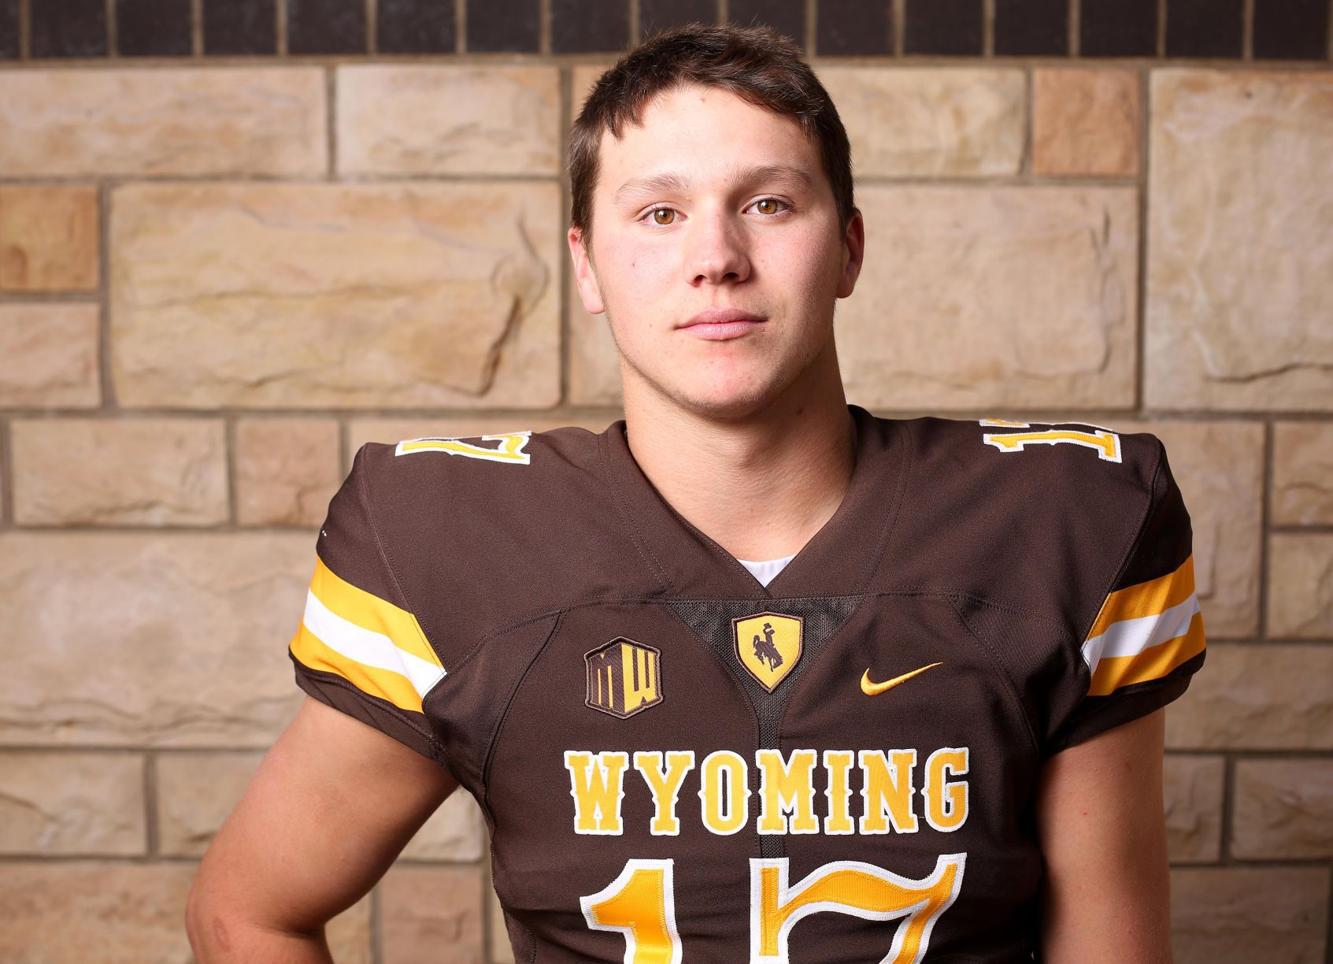 Josh Allen could be missing piece to Wyoming's offensive puzzle